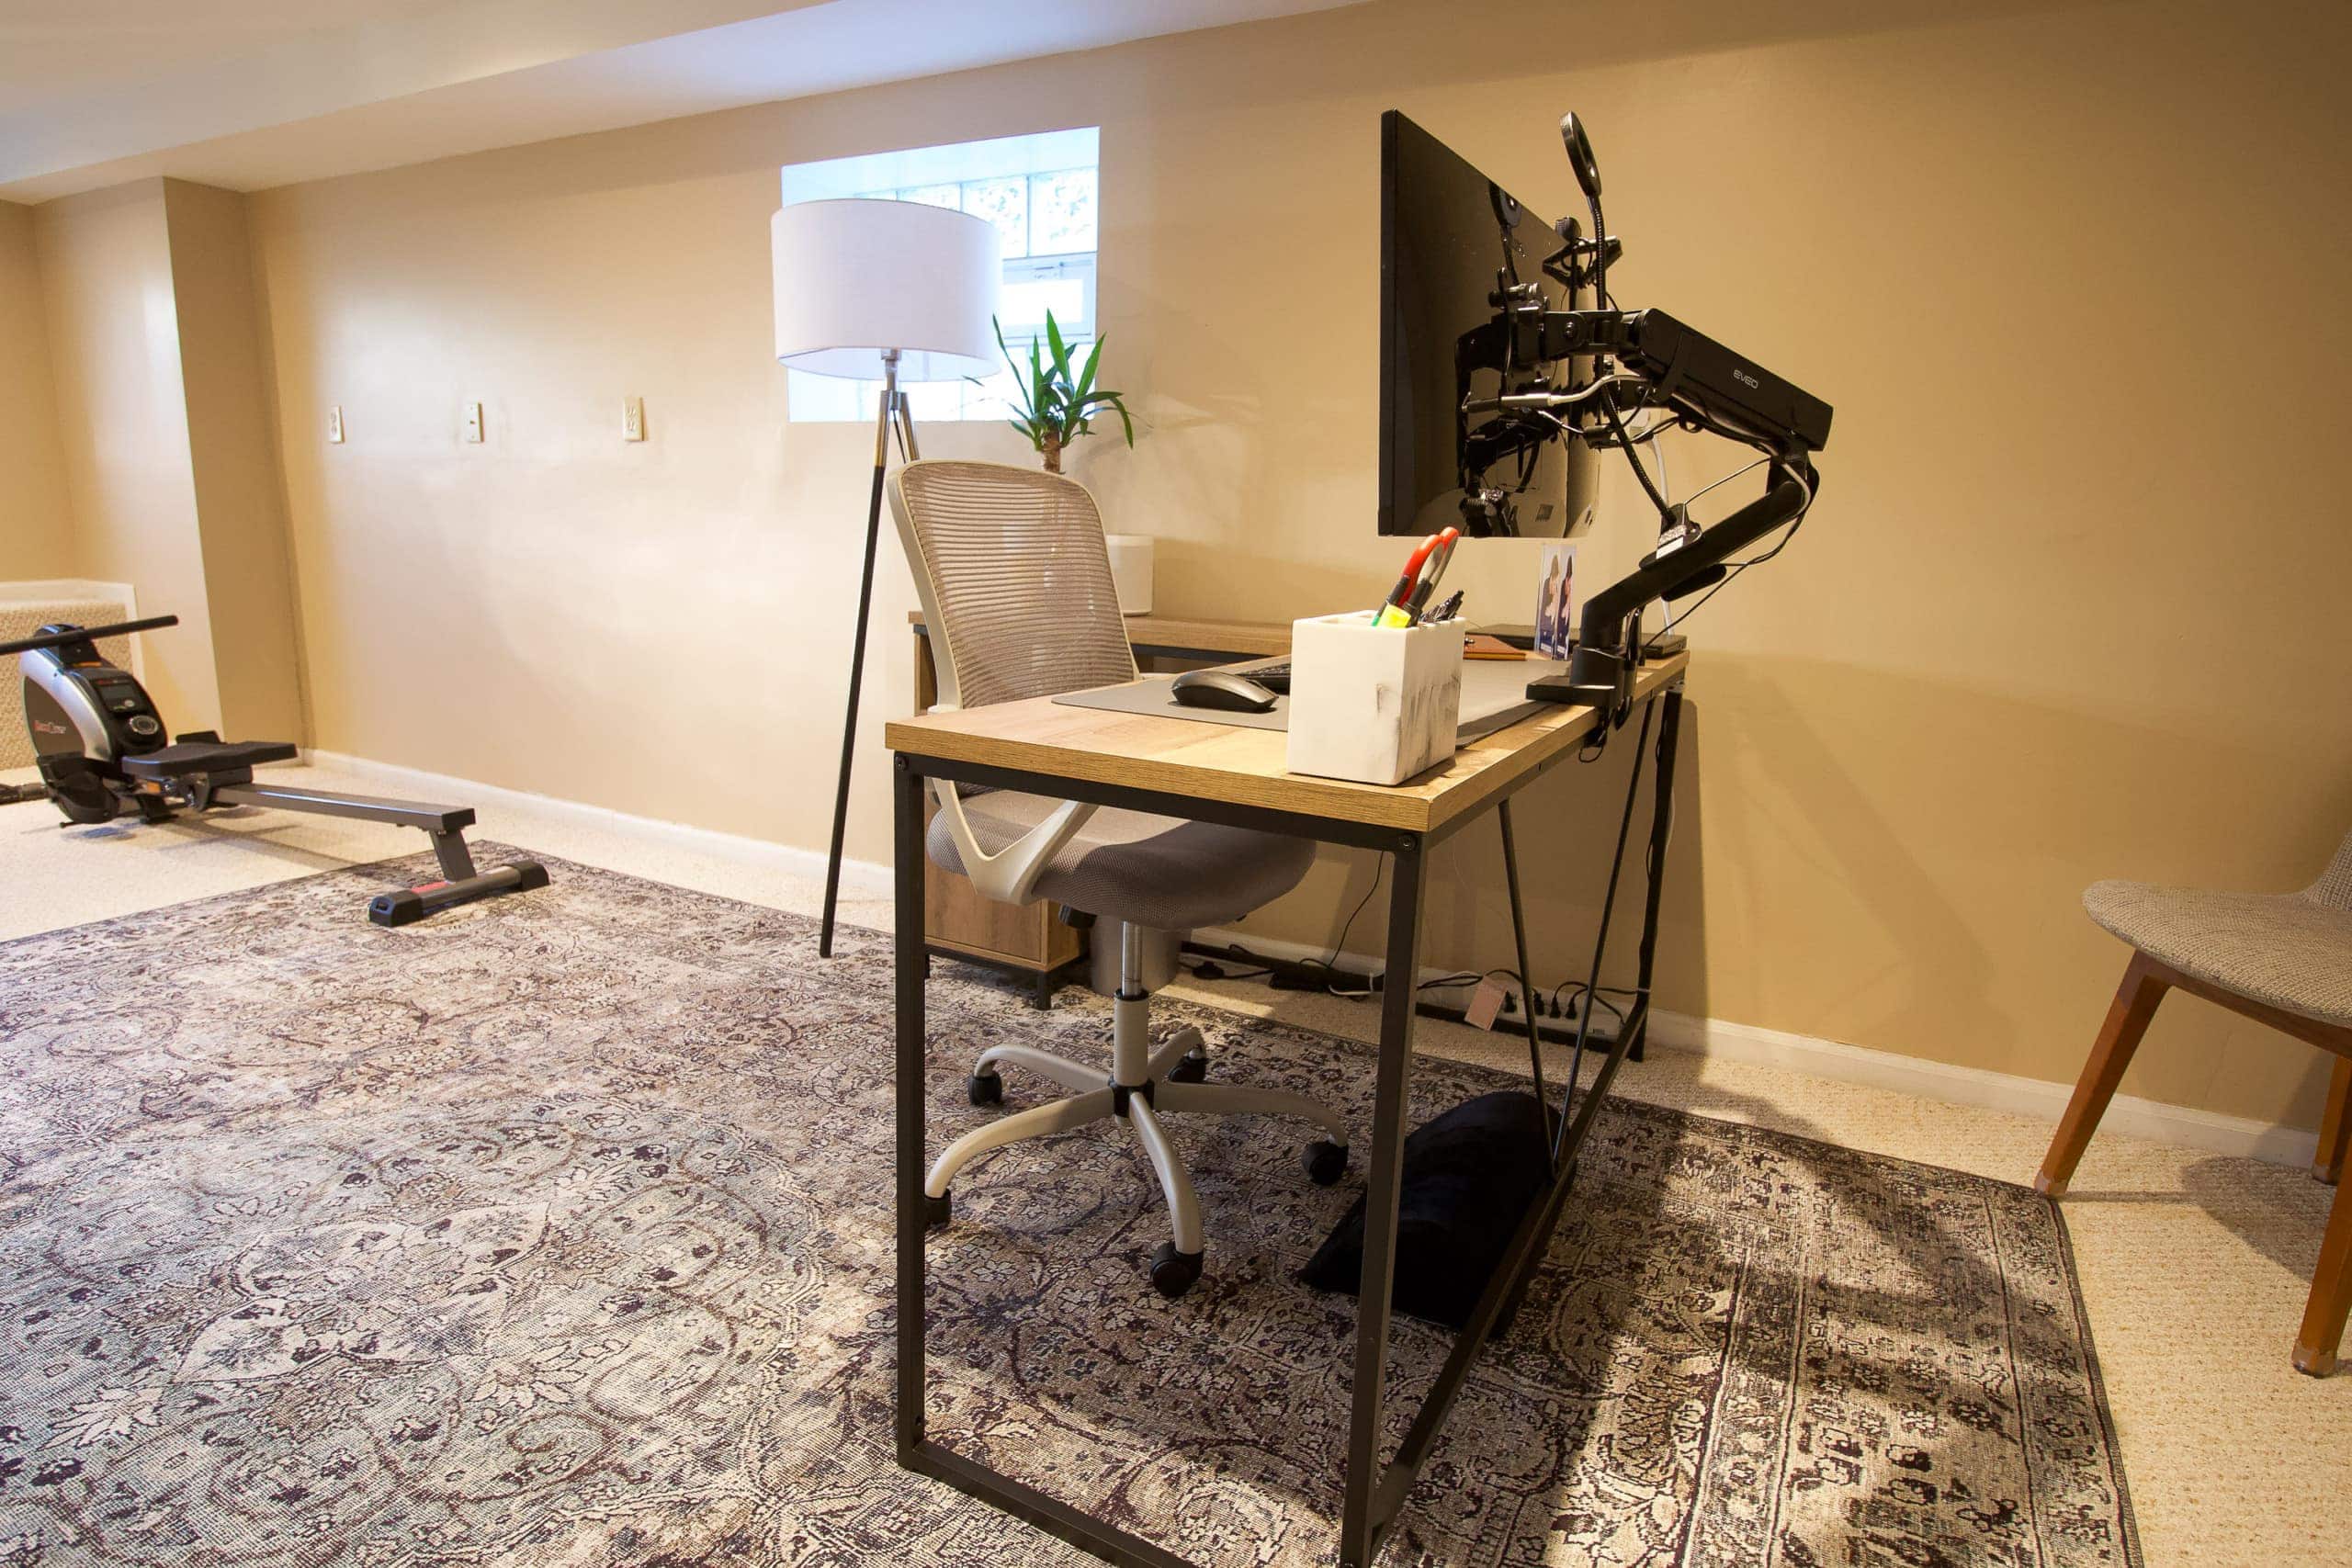 How to setup a basement office space